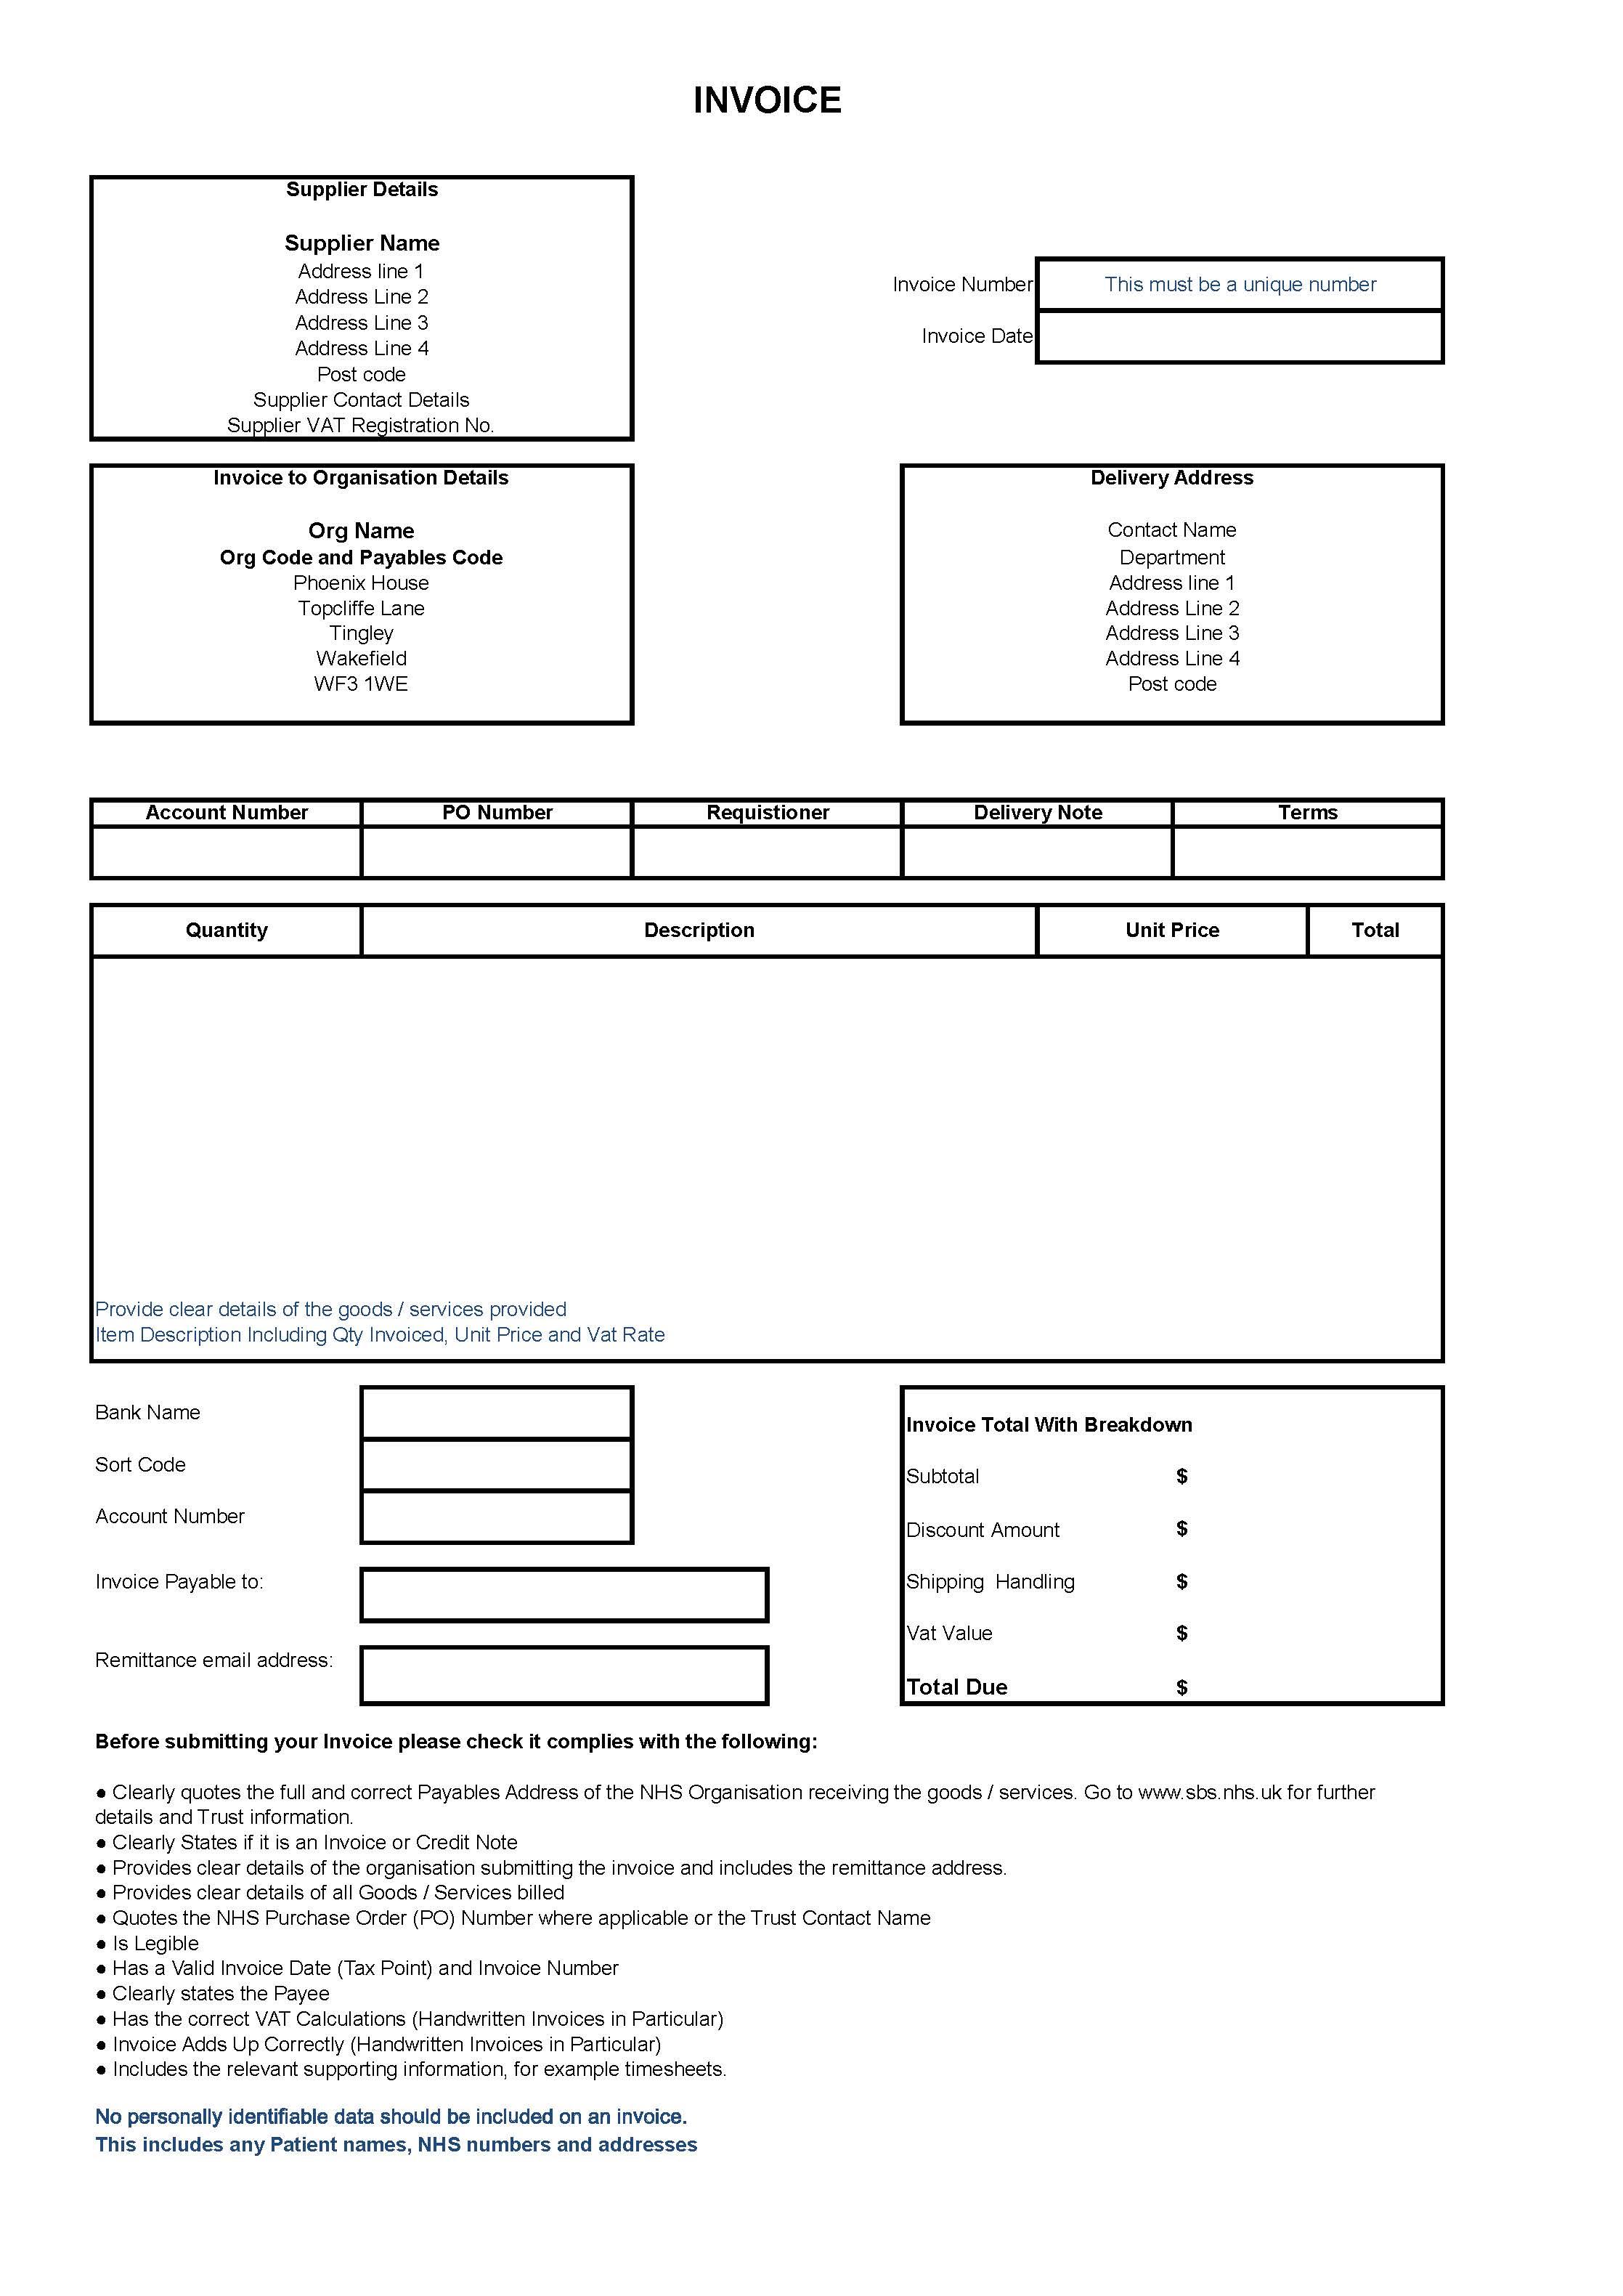 Invoice Order Delivery Template with Instructions main image